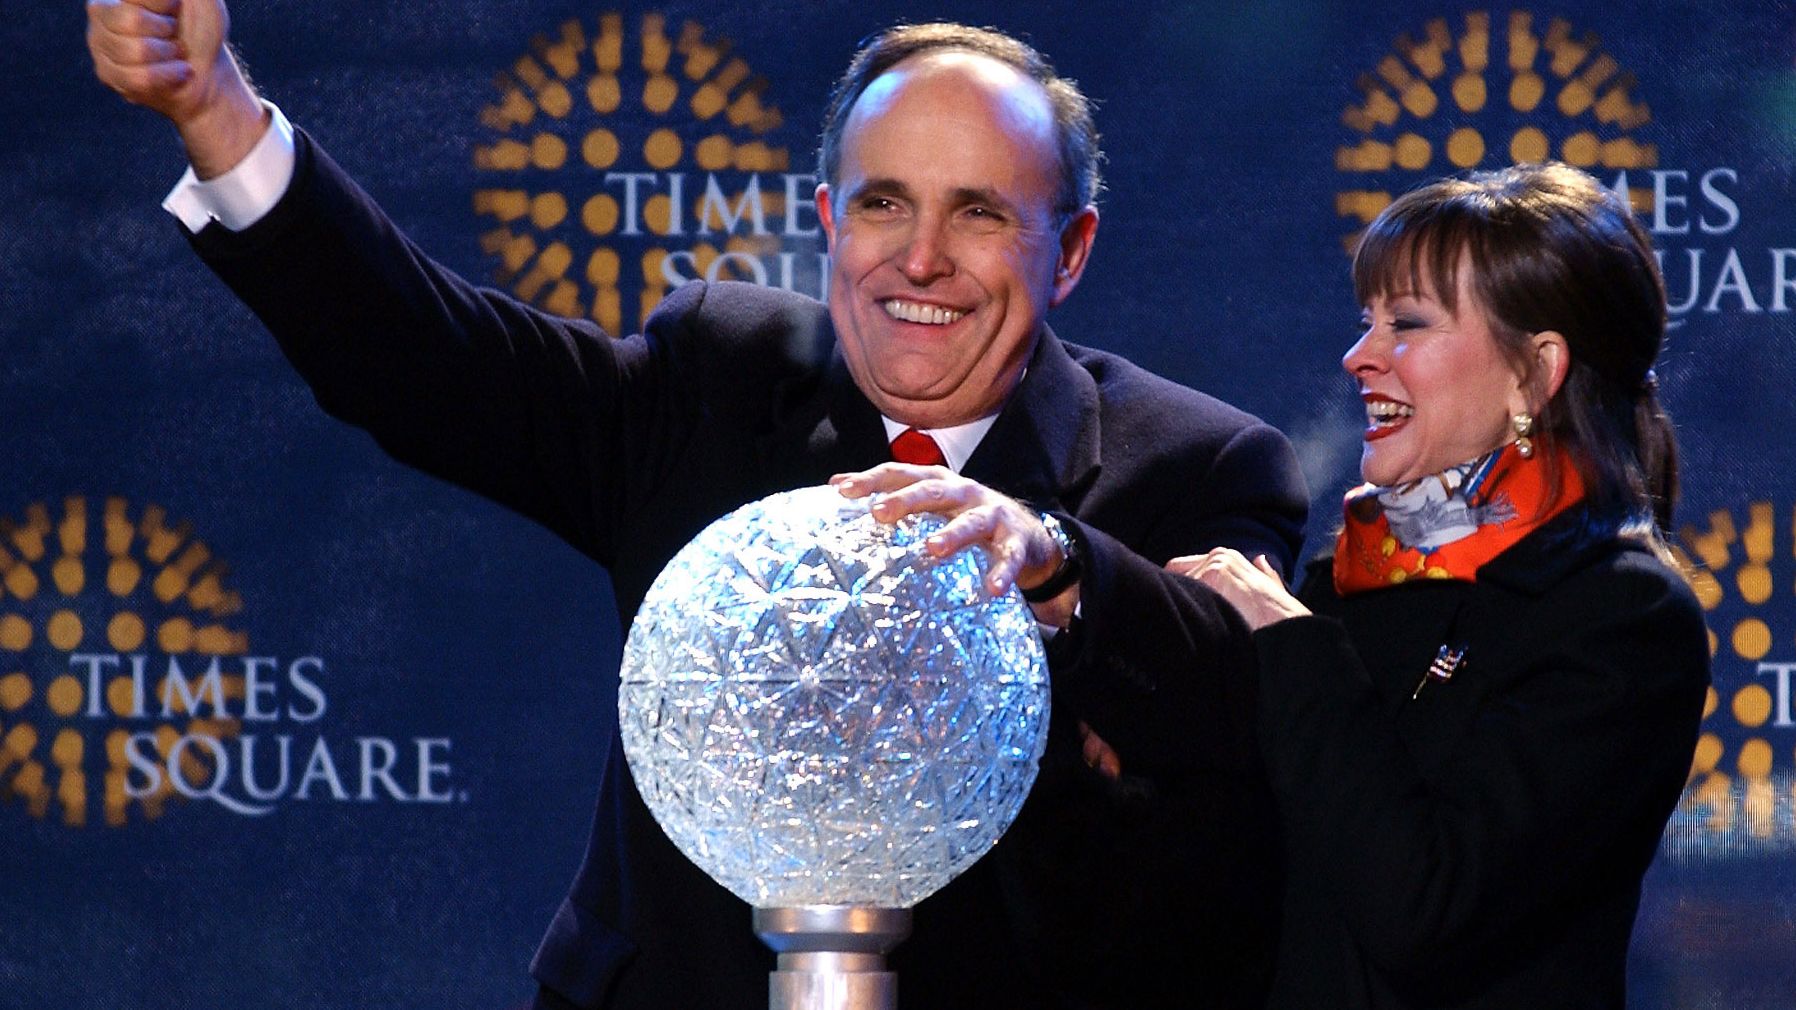 Giuliani and his third wife, Judi, attend New Year's festivities in New York in 2002. Giuliani's second and final term had just ended.